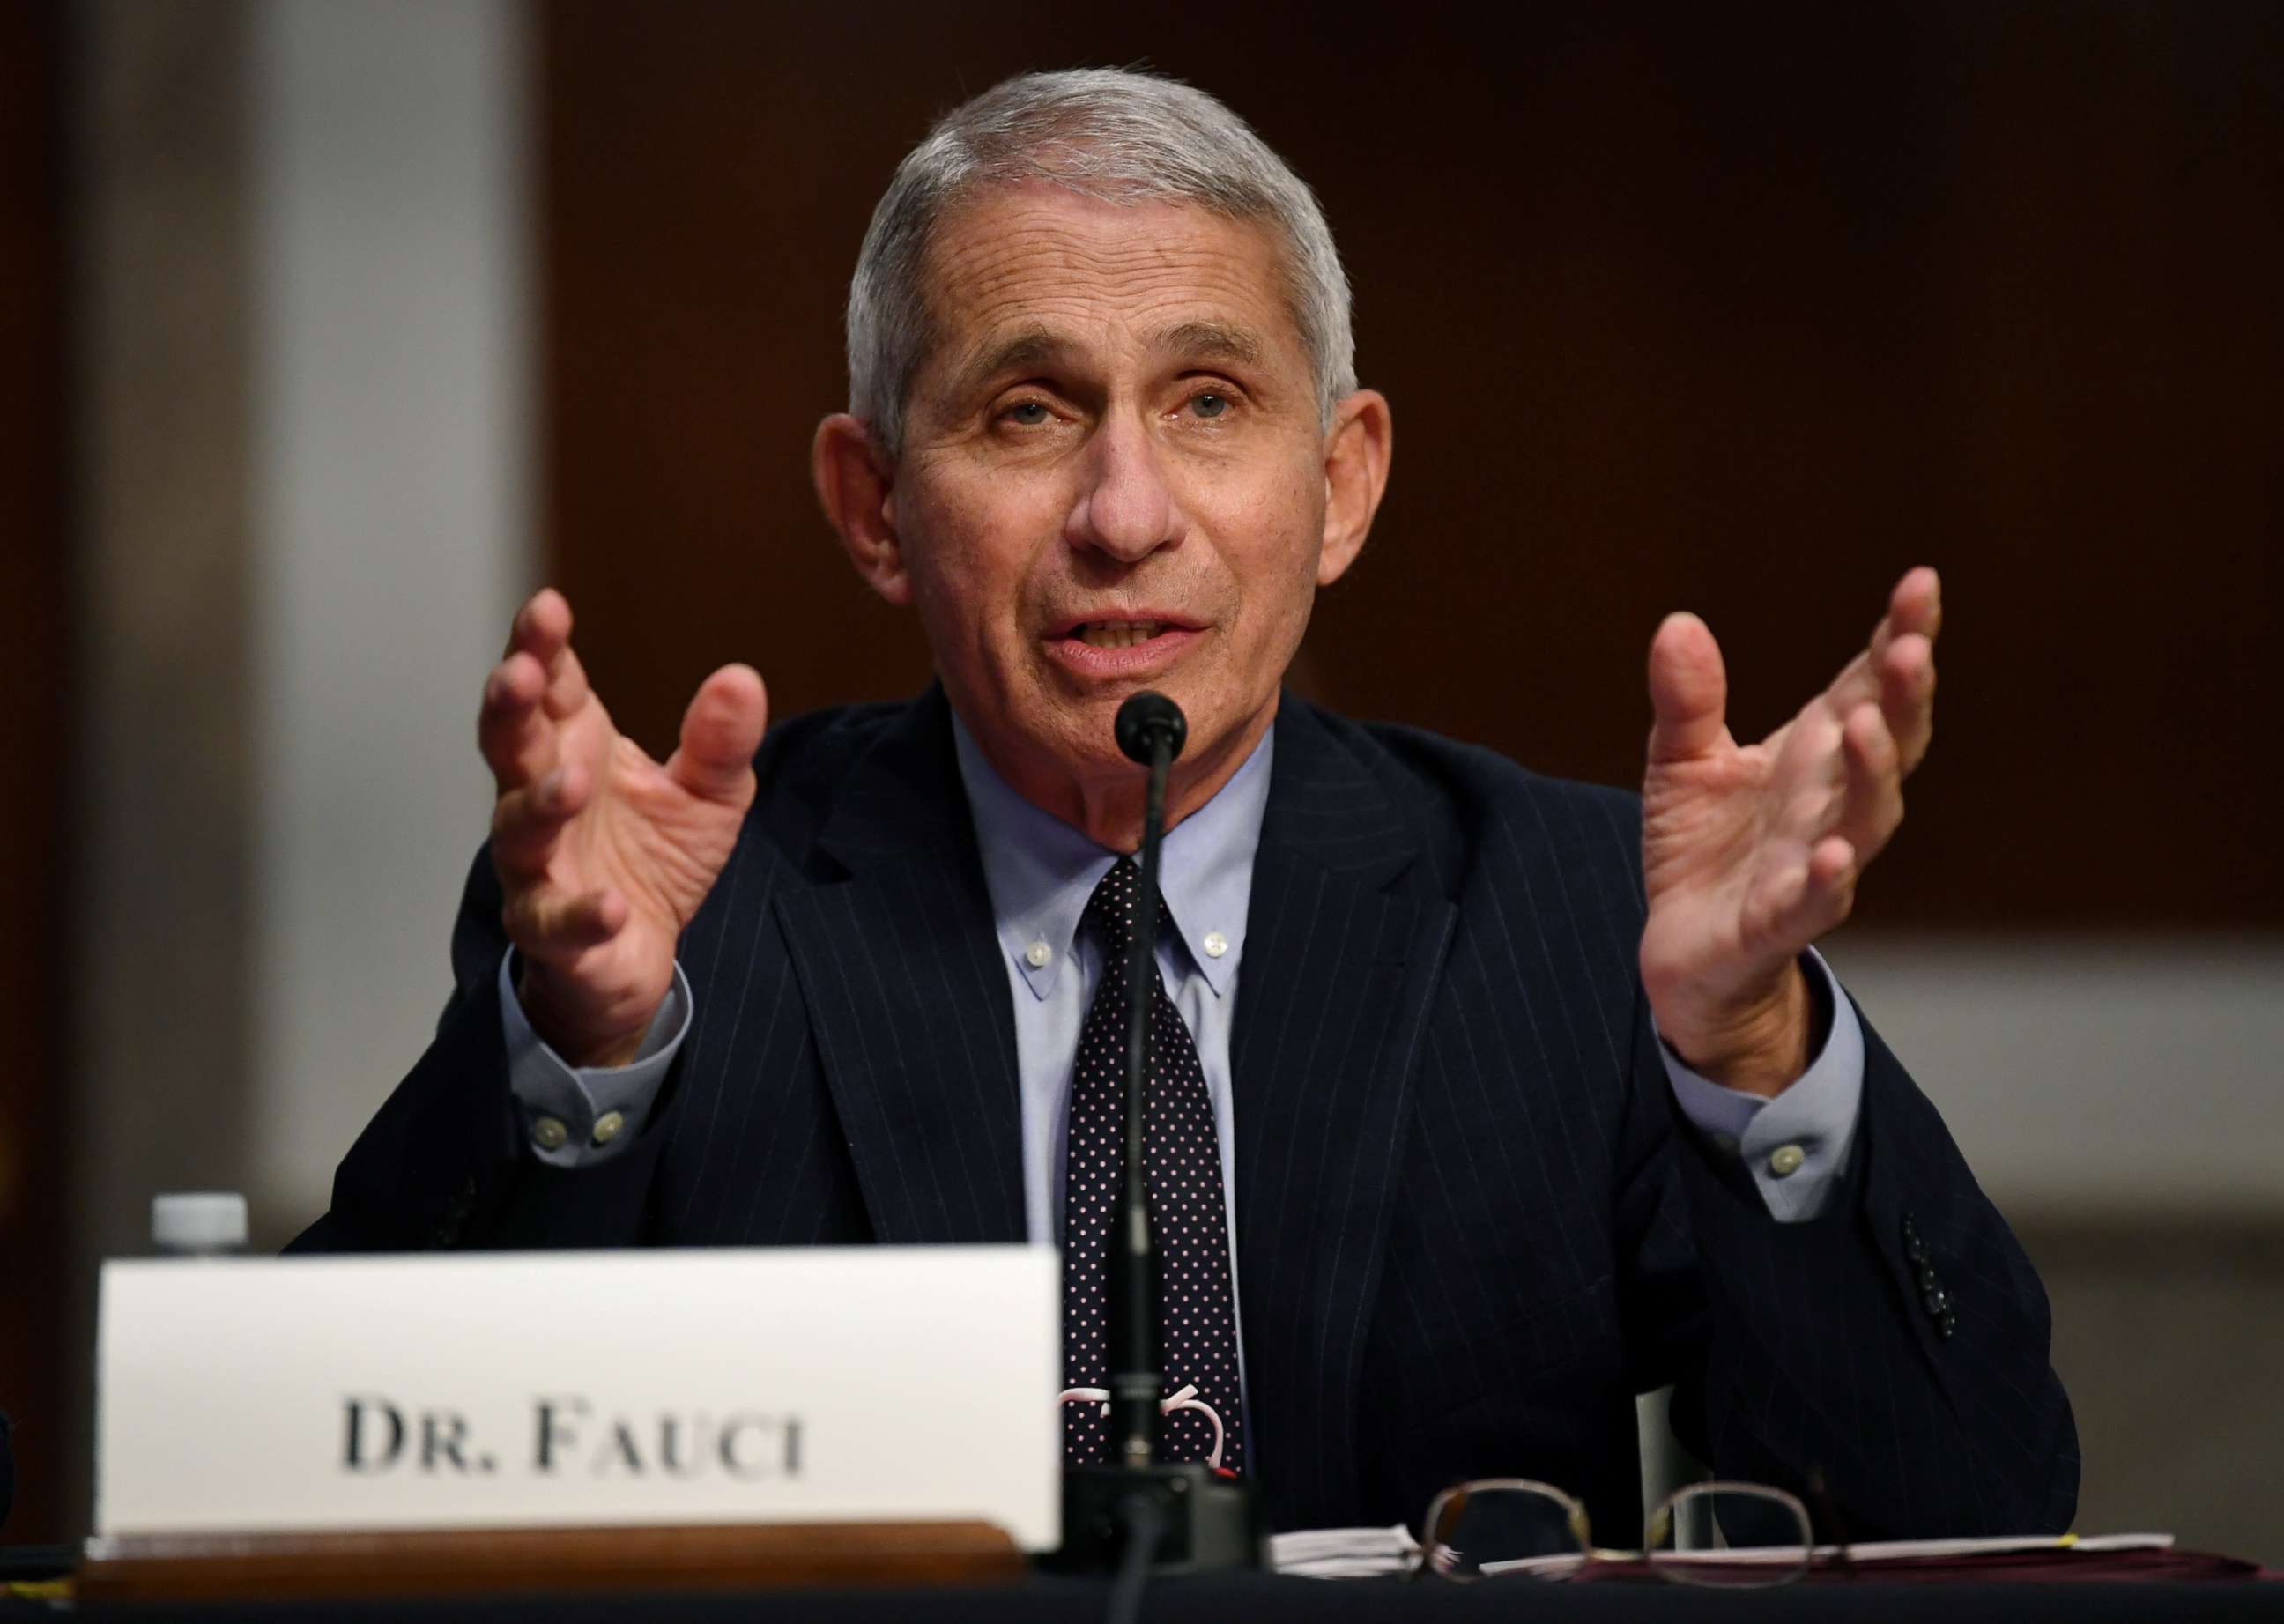 PHOTO: Dr Anthony Fauci, director of the National Institute for Allergy and Infectious Diseases, testifies during a Senate Health, Education, Labor and Pensions (HELP) Committee hearing on Capitol Hill in Washington, June 30, 2020.